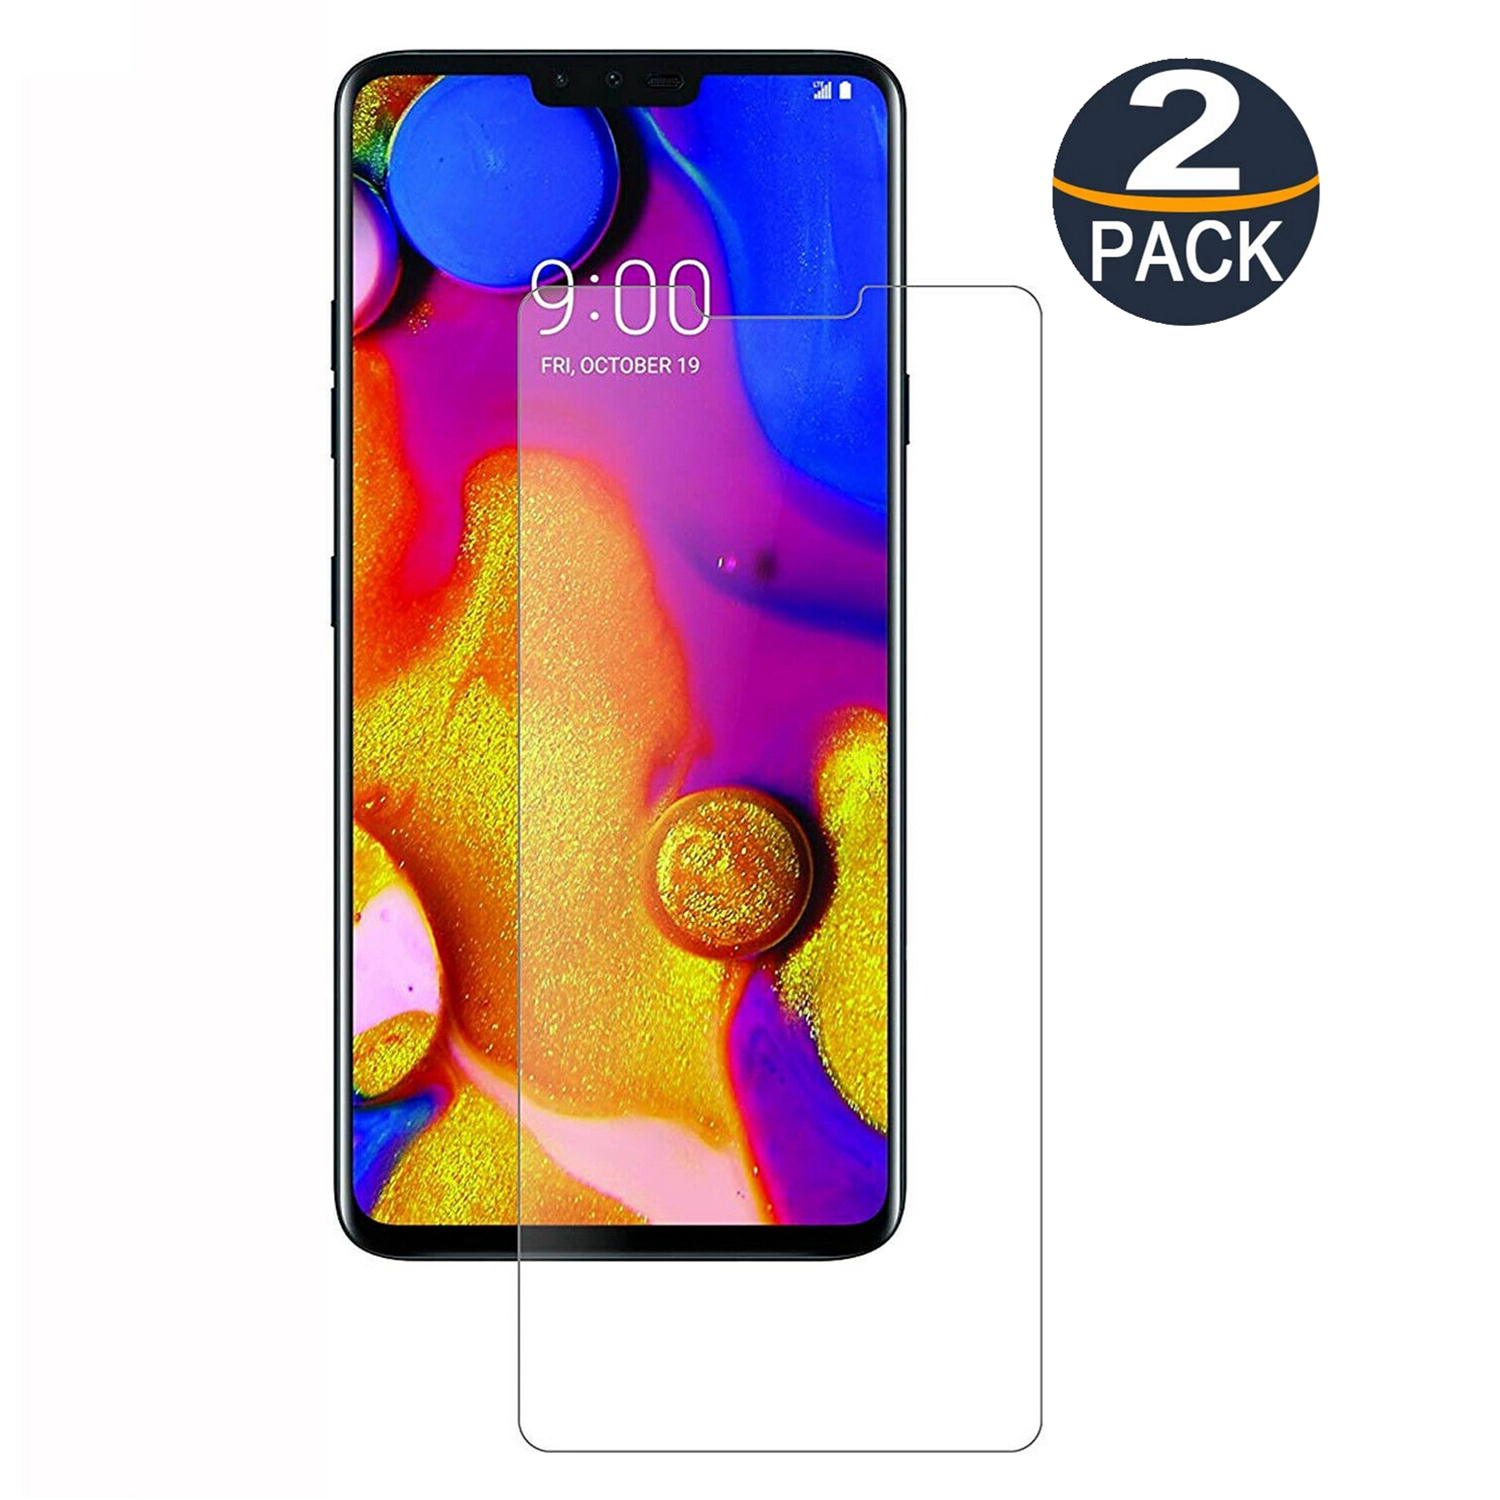 【2 Packs】 CSmart Premium Tempered Glass Screen Protector for LG V40, Case Friendly & Bubble Free